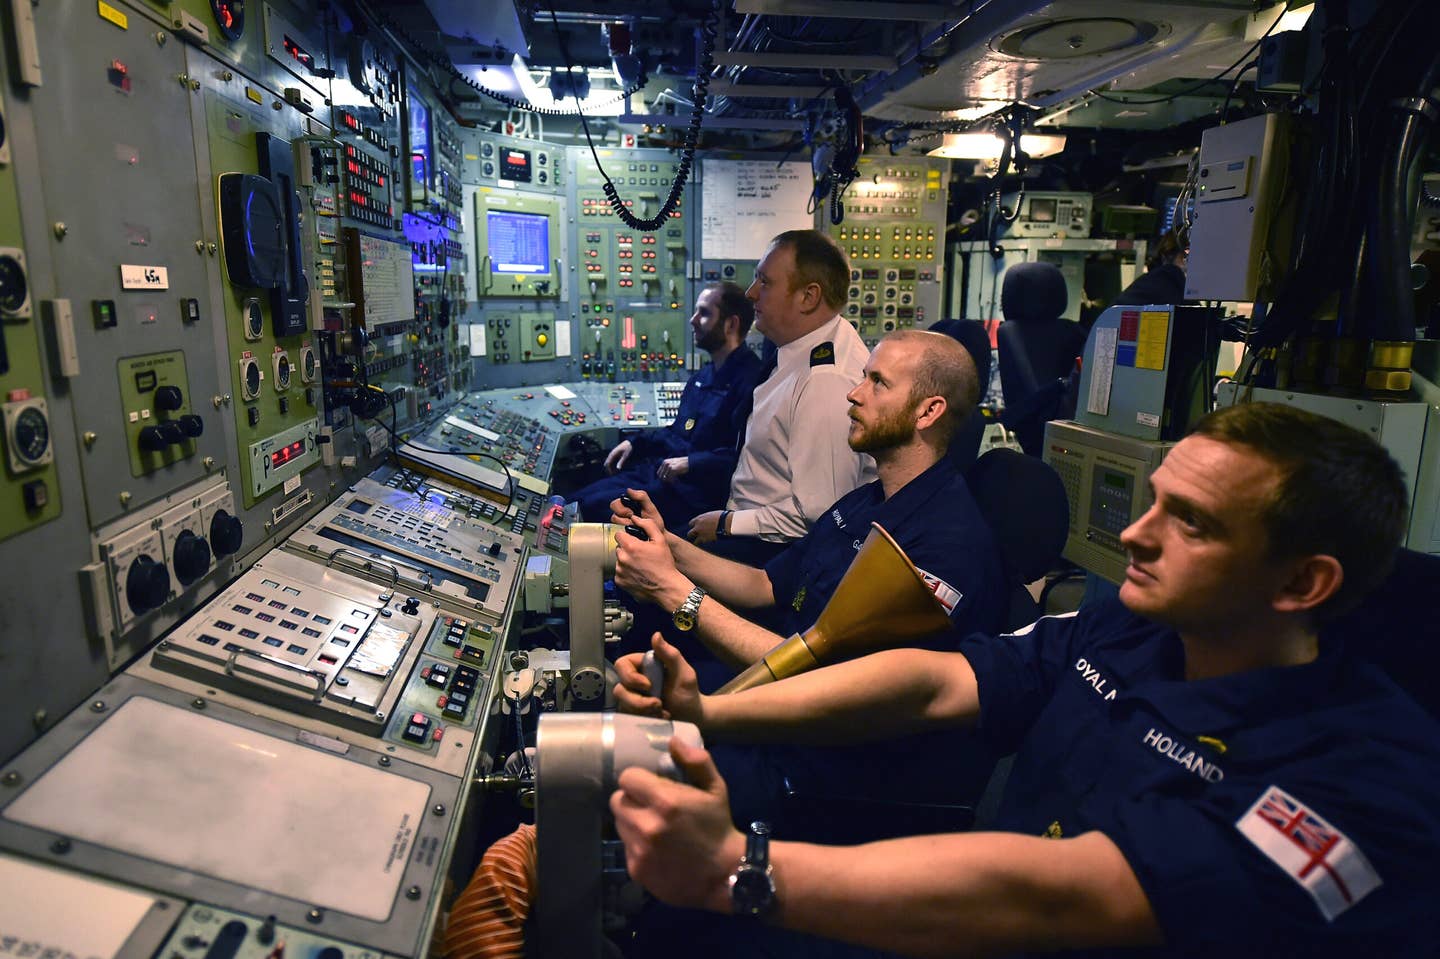 Royal Navy personnel in the control room of a <em>Vanguard</em> class SSBN. <em>Photo by Jeff J Mitchell/Getty Images</em>